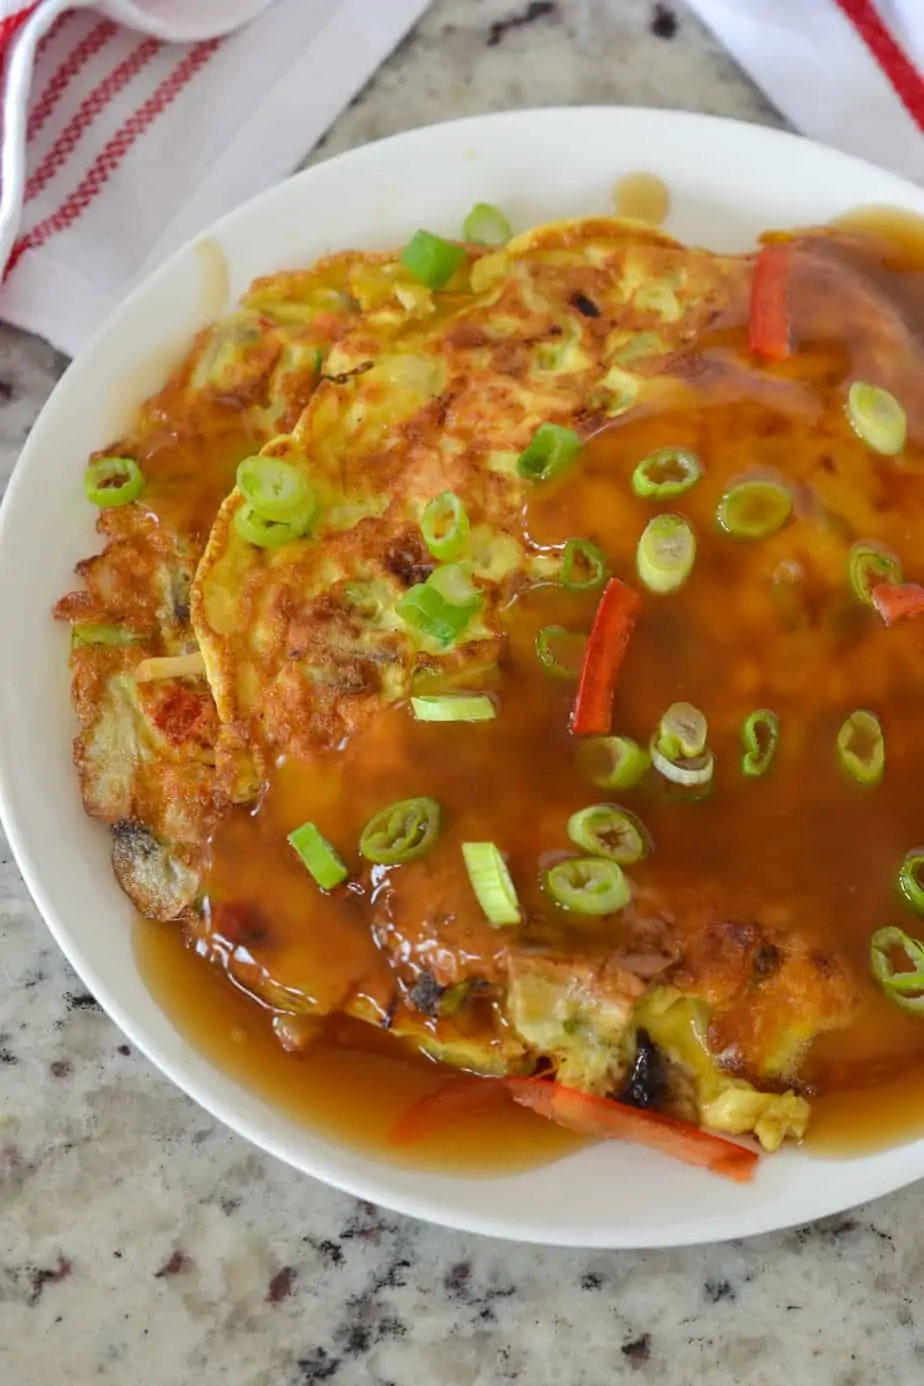 Egg Foo Young is one of our favorite breakfast recipes and always a hit with friends and family.